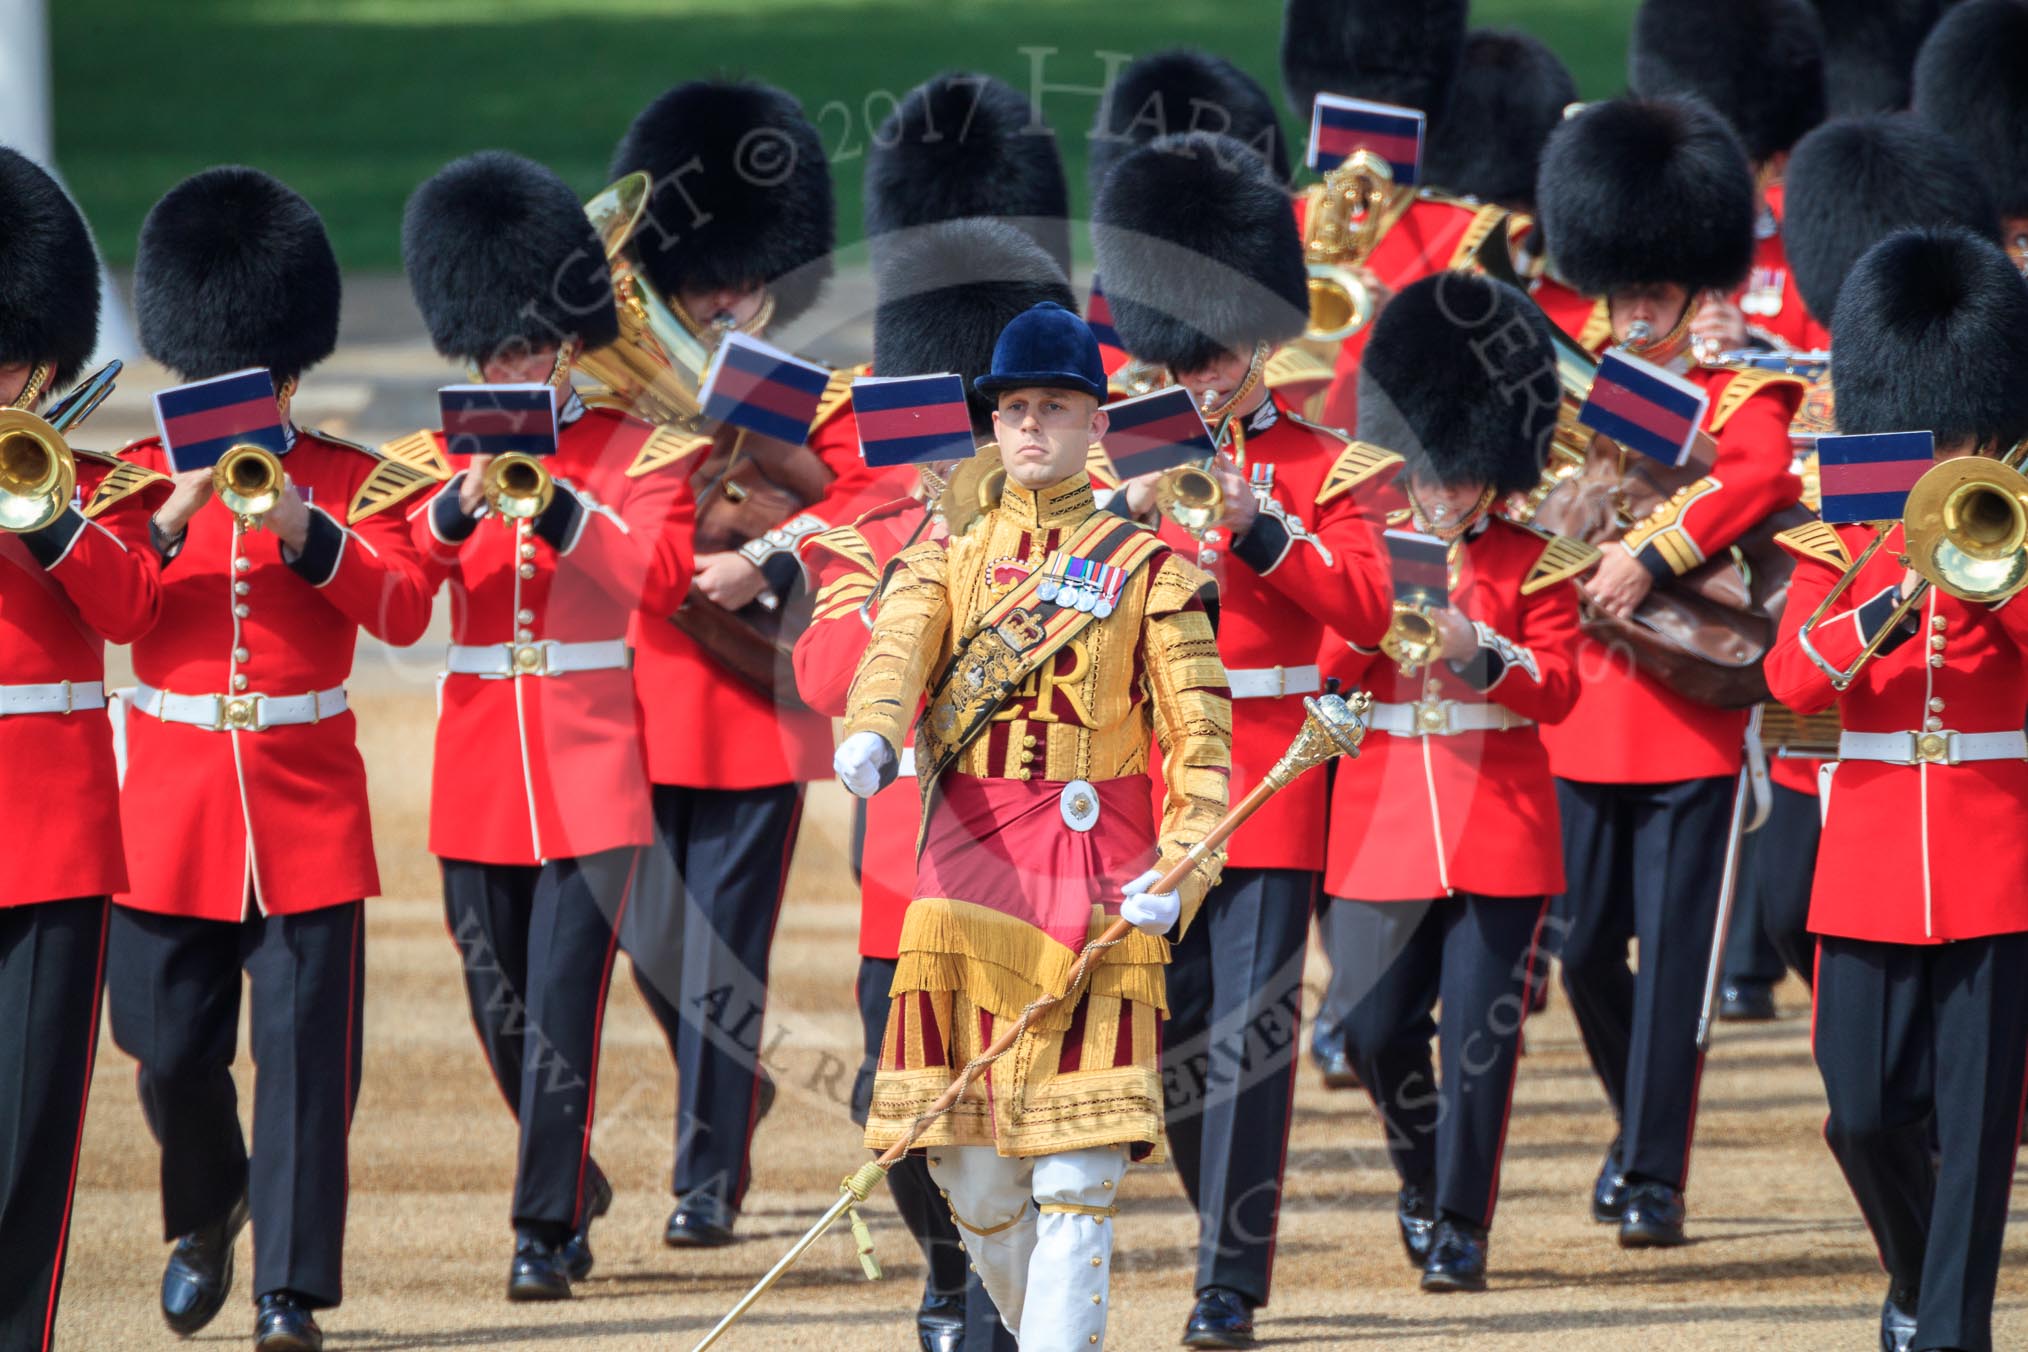 Drum Major Jonny Stranix, 1st Battalion Scots Guards, leading the Band of the Scots Guards onto Horse Guards Parade before Trooping the Colour 2018, The Queen's Birthday Parade at Horse Guards Parade, Westminster, London, 9 June 2018, 10:18.